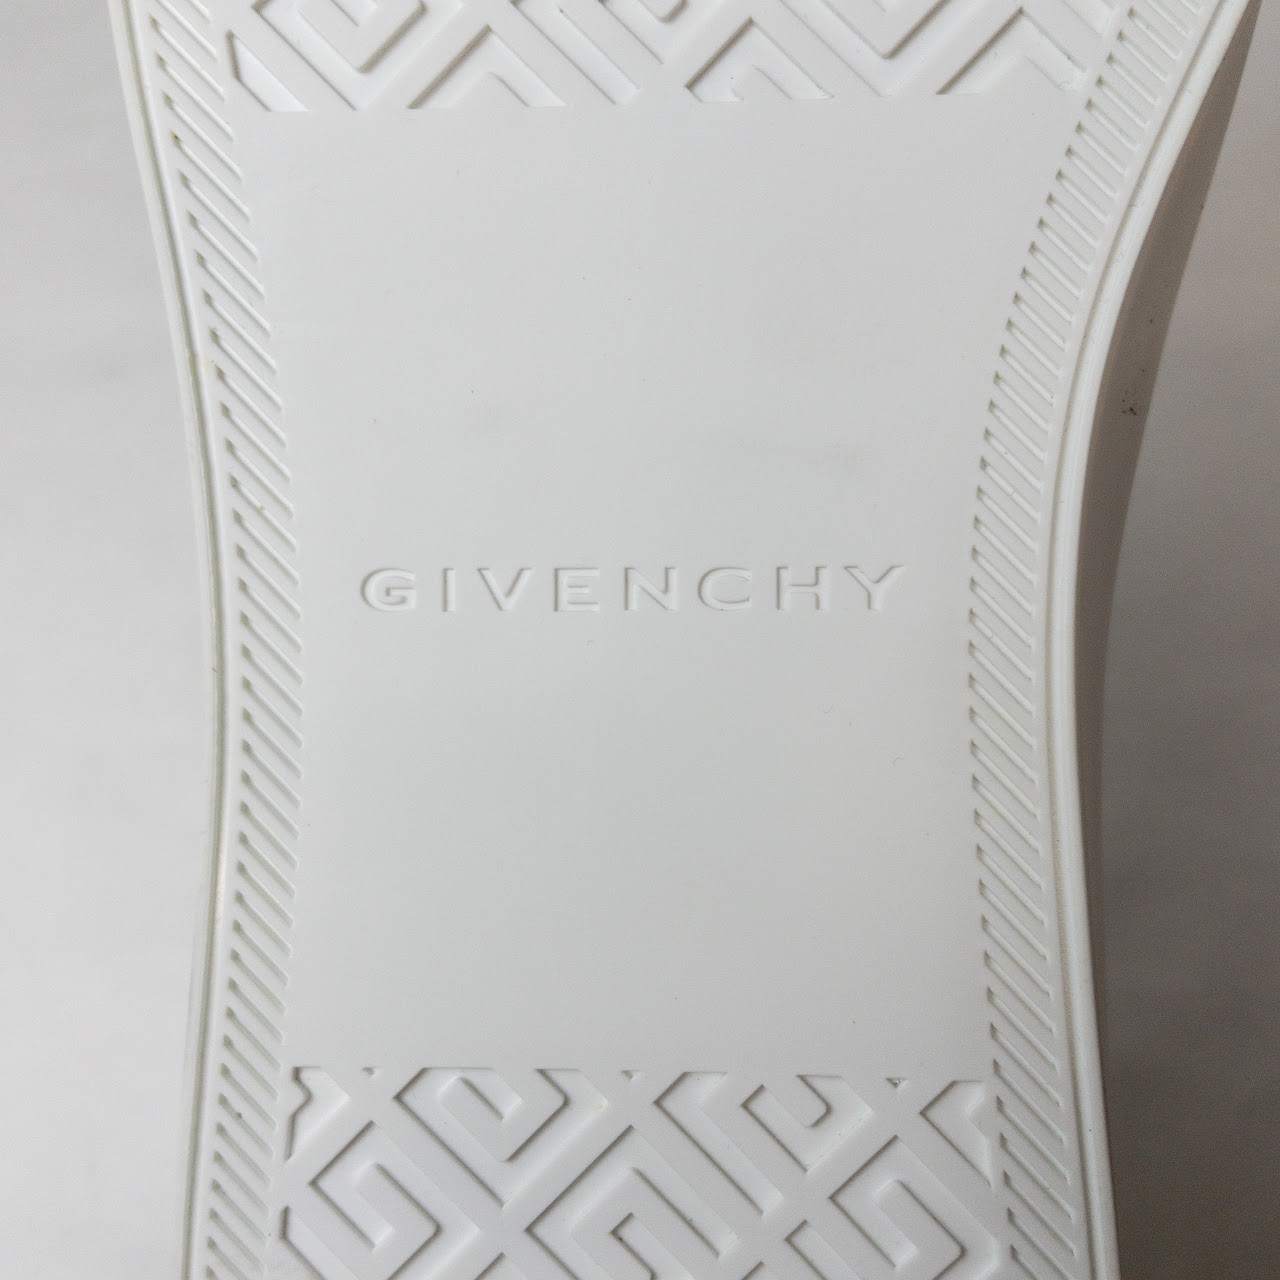 Givenchy White Leather Sneakers